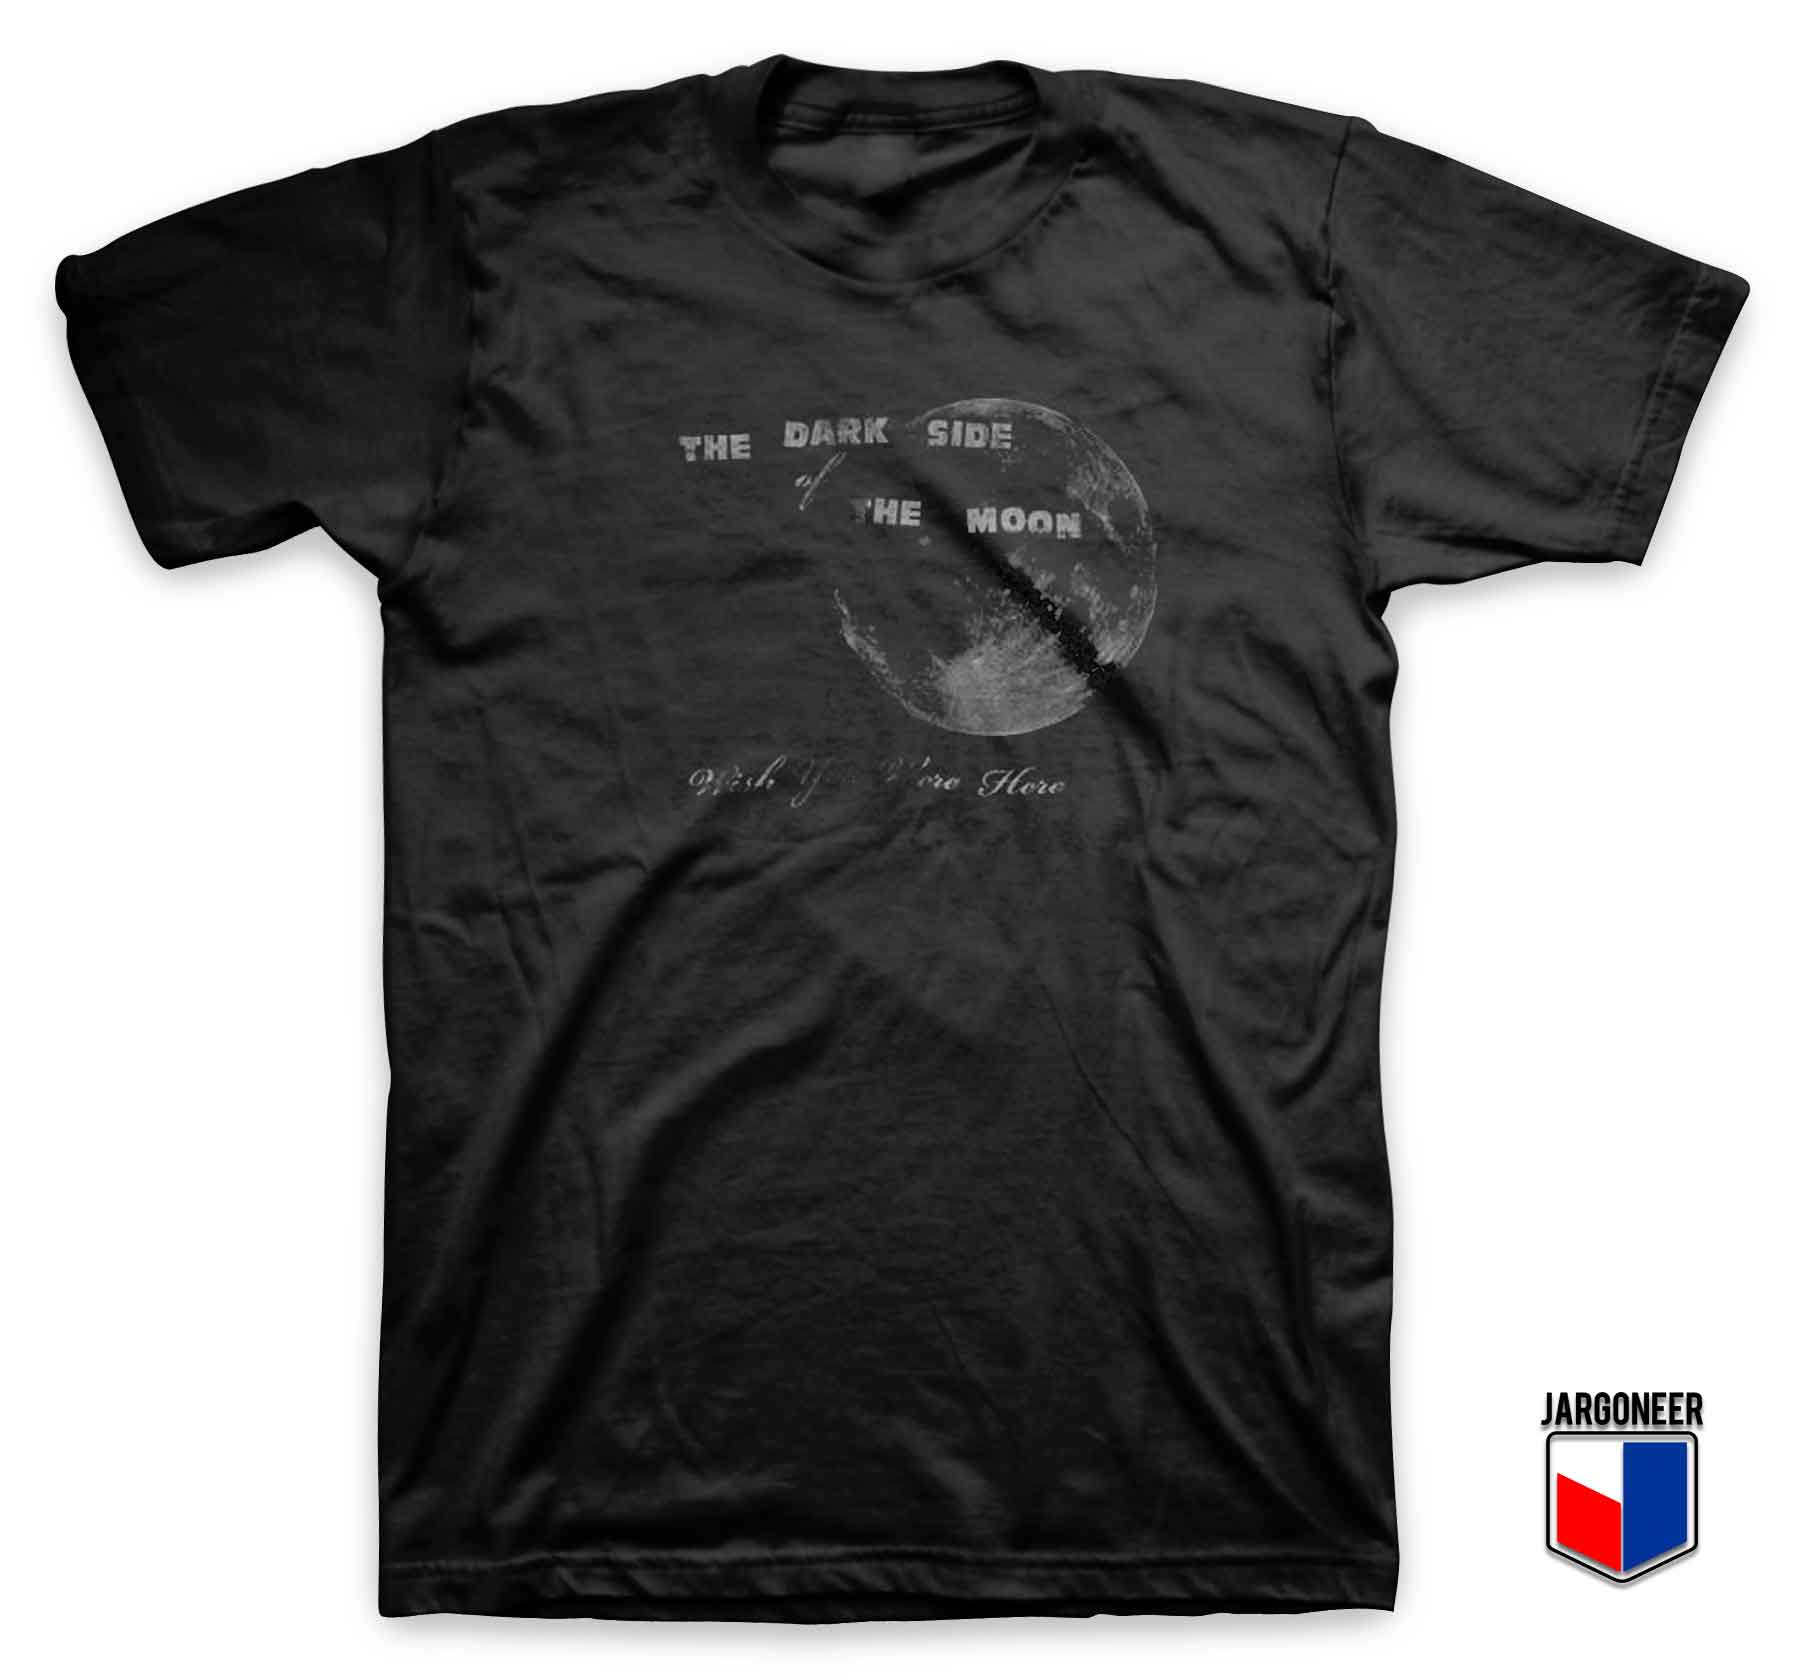 The Dark Side Of The Moon - Shop Unique Graphic Cool Shirt Designs